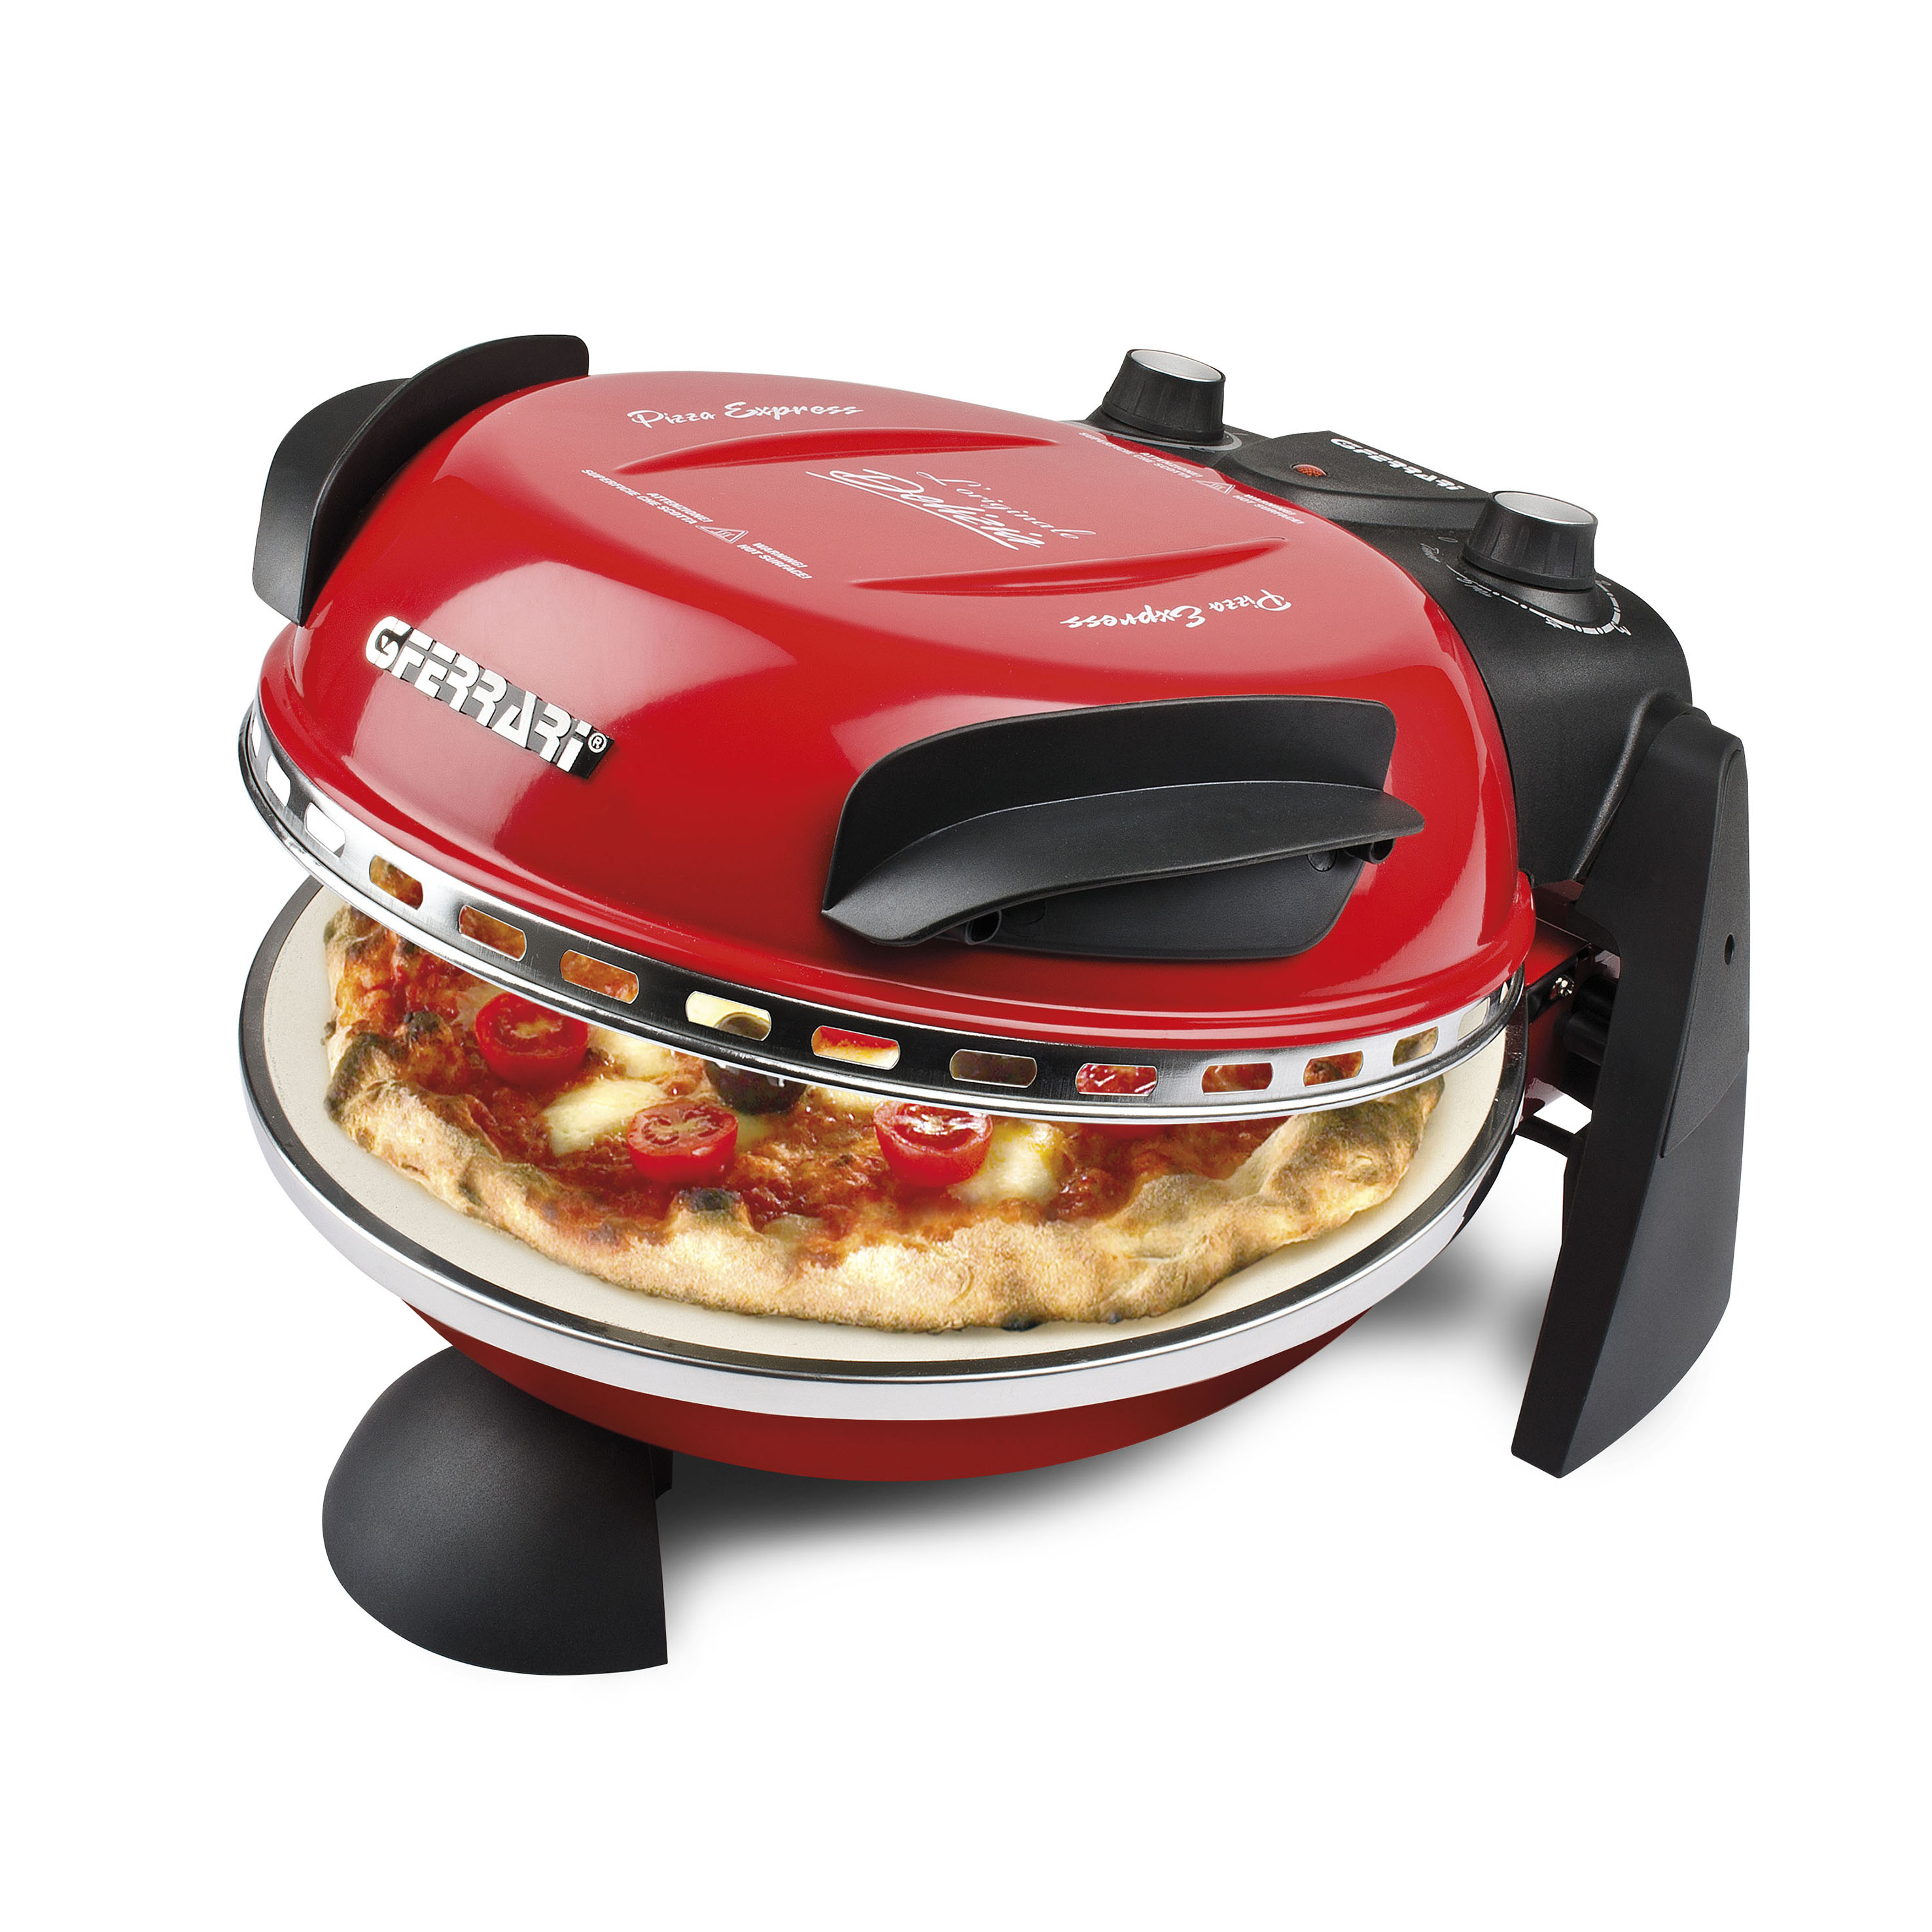 G1000602, Delizia, pizza oven, 1200W, up to 400C, red